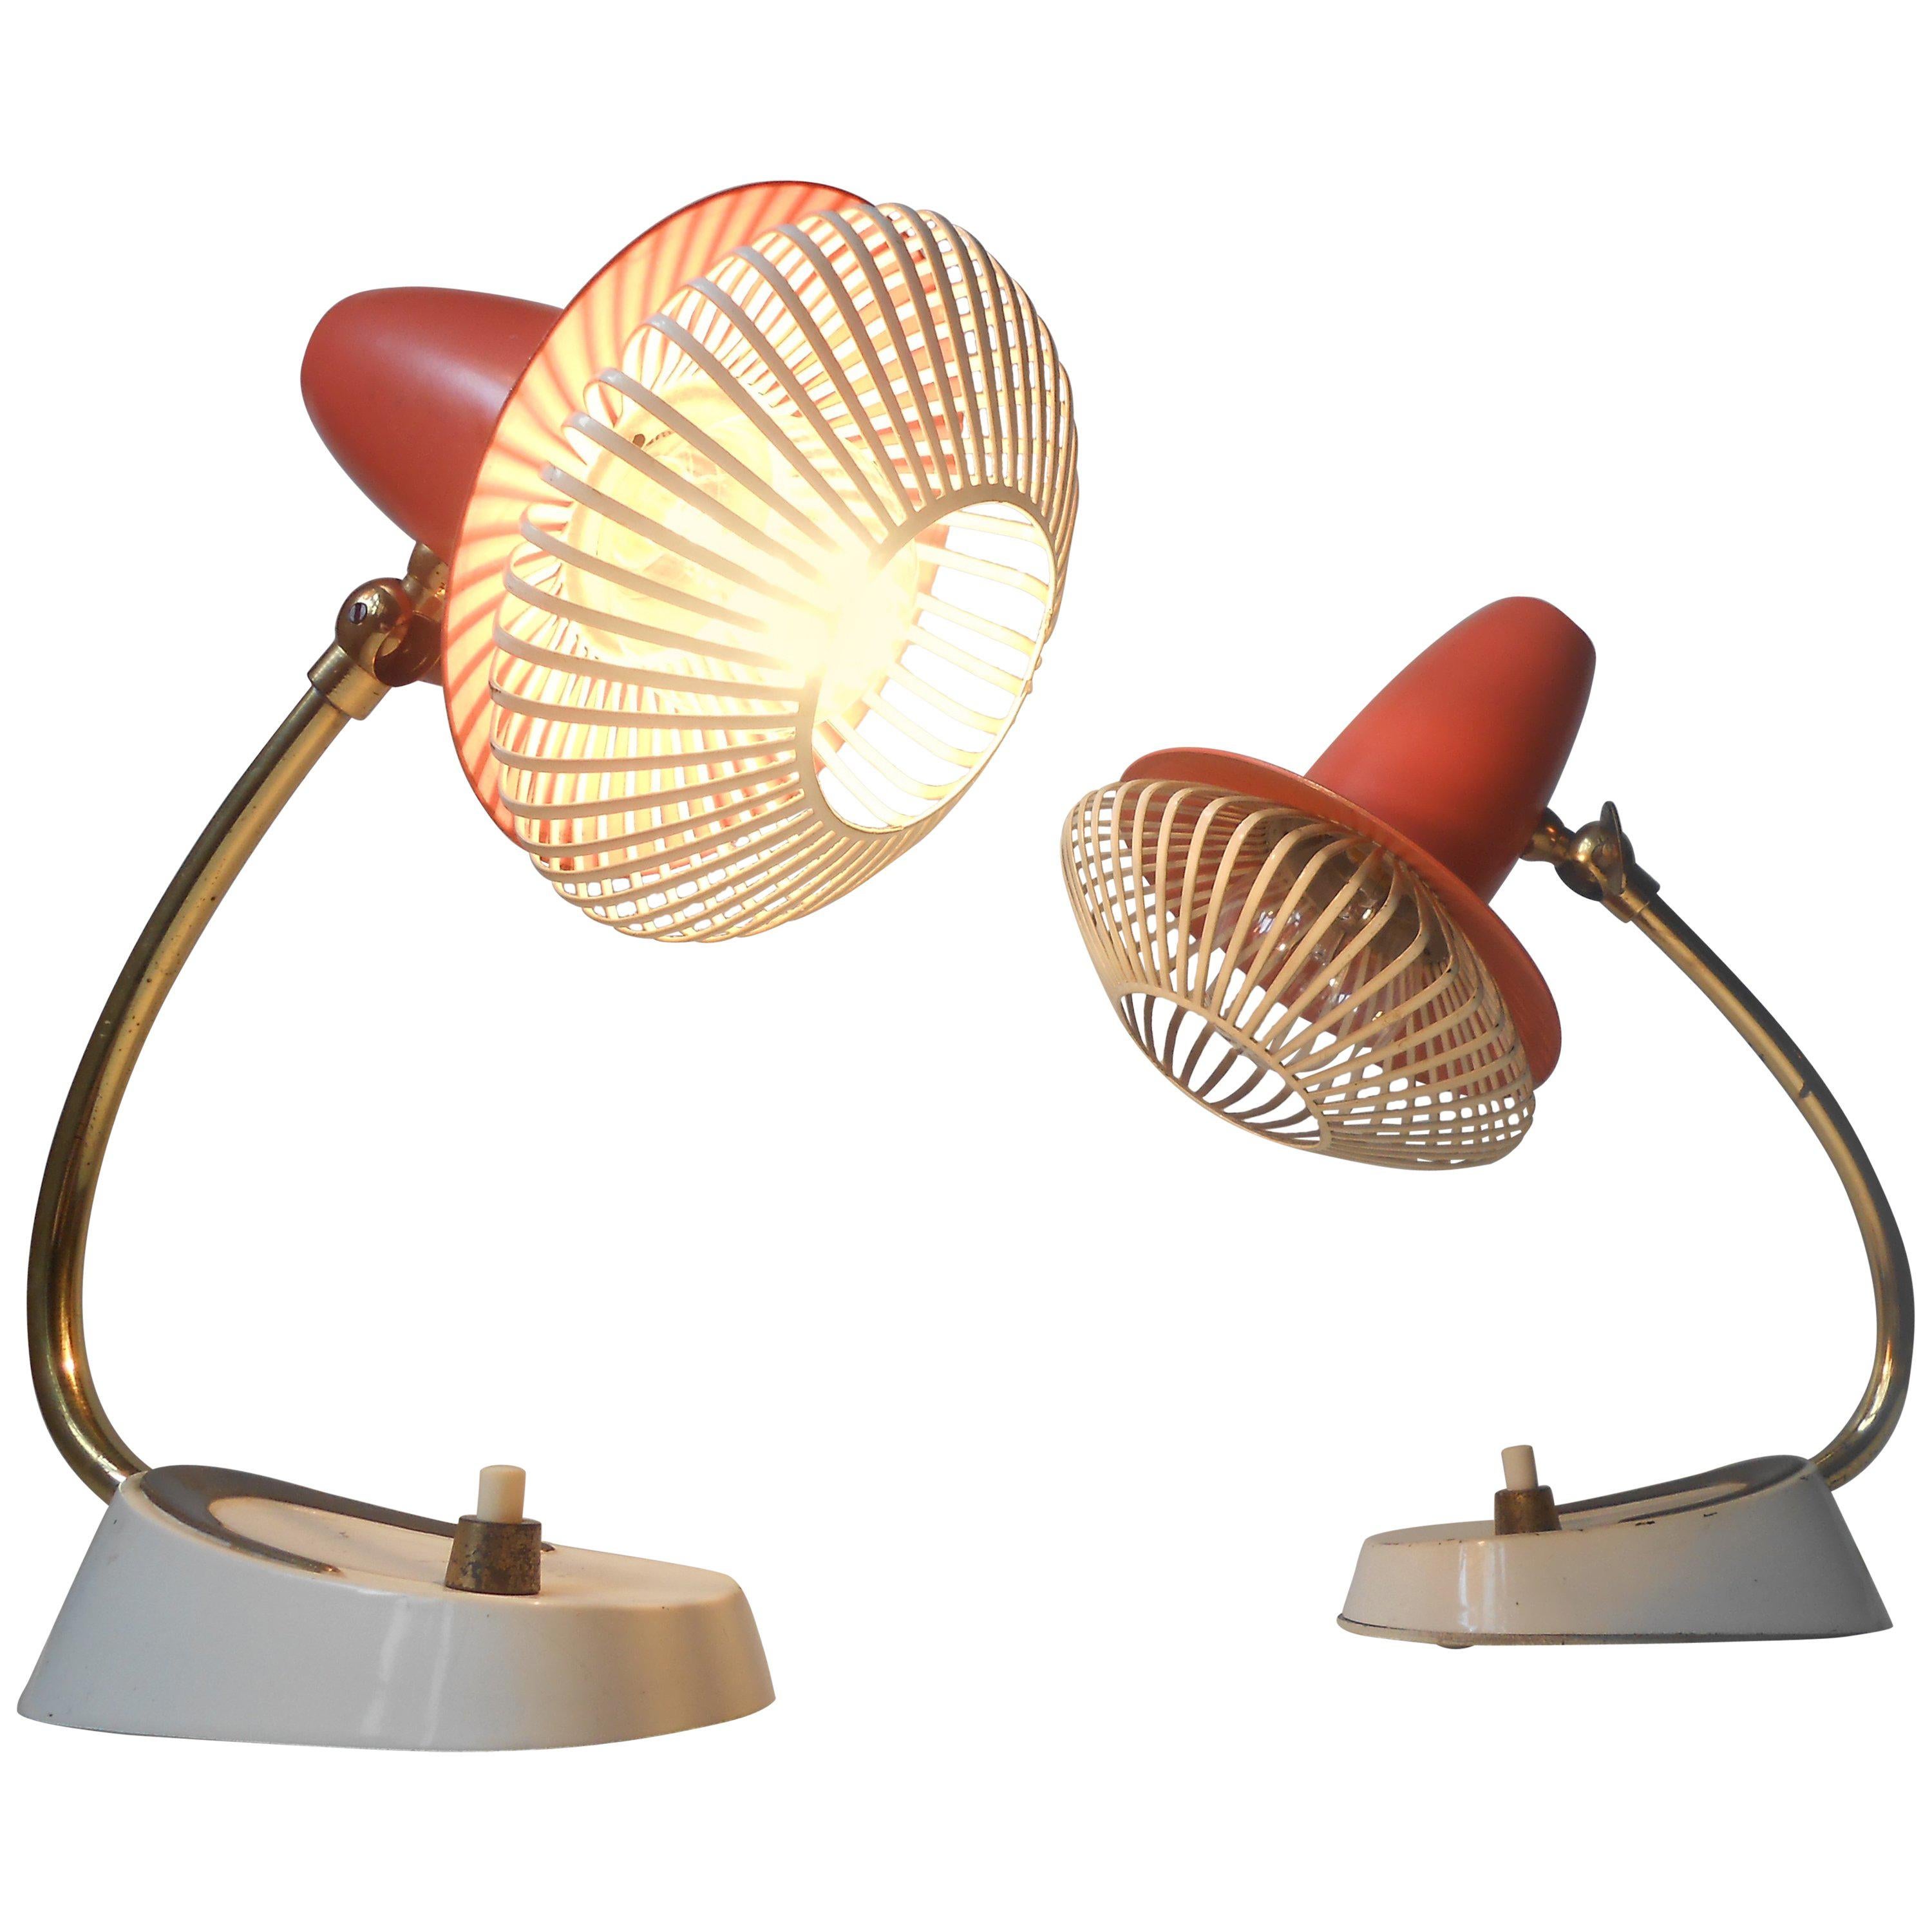 Pair of Small Italian Modern Bedside Table Lamps with Wire Mesh, Stilnovo Era